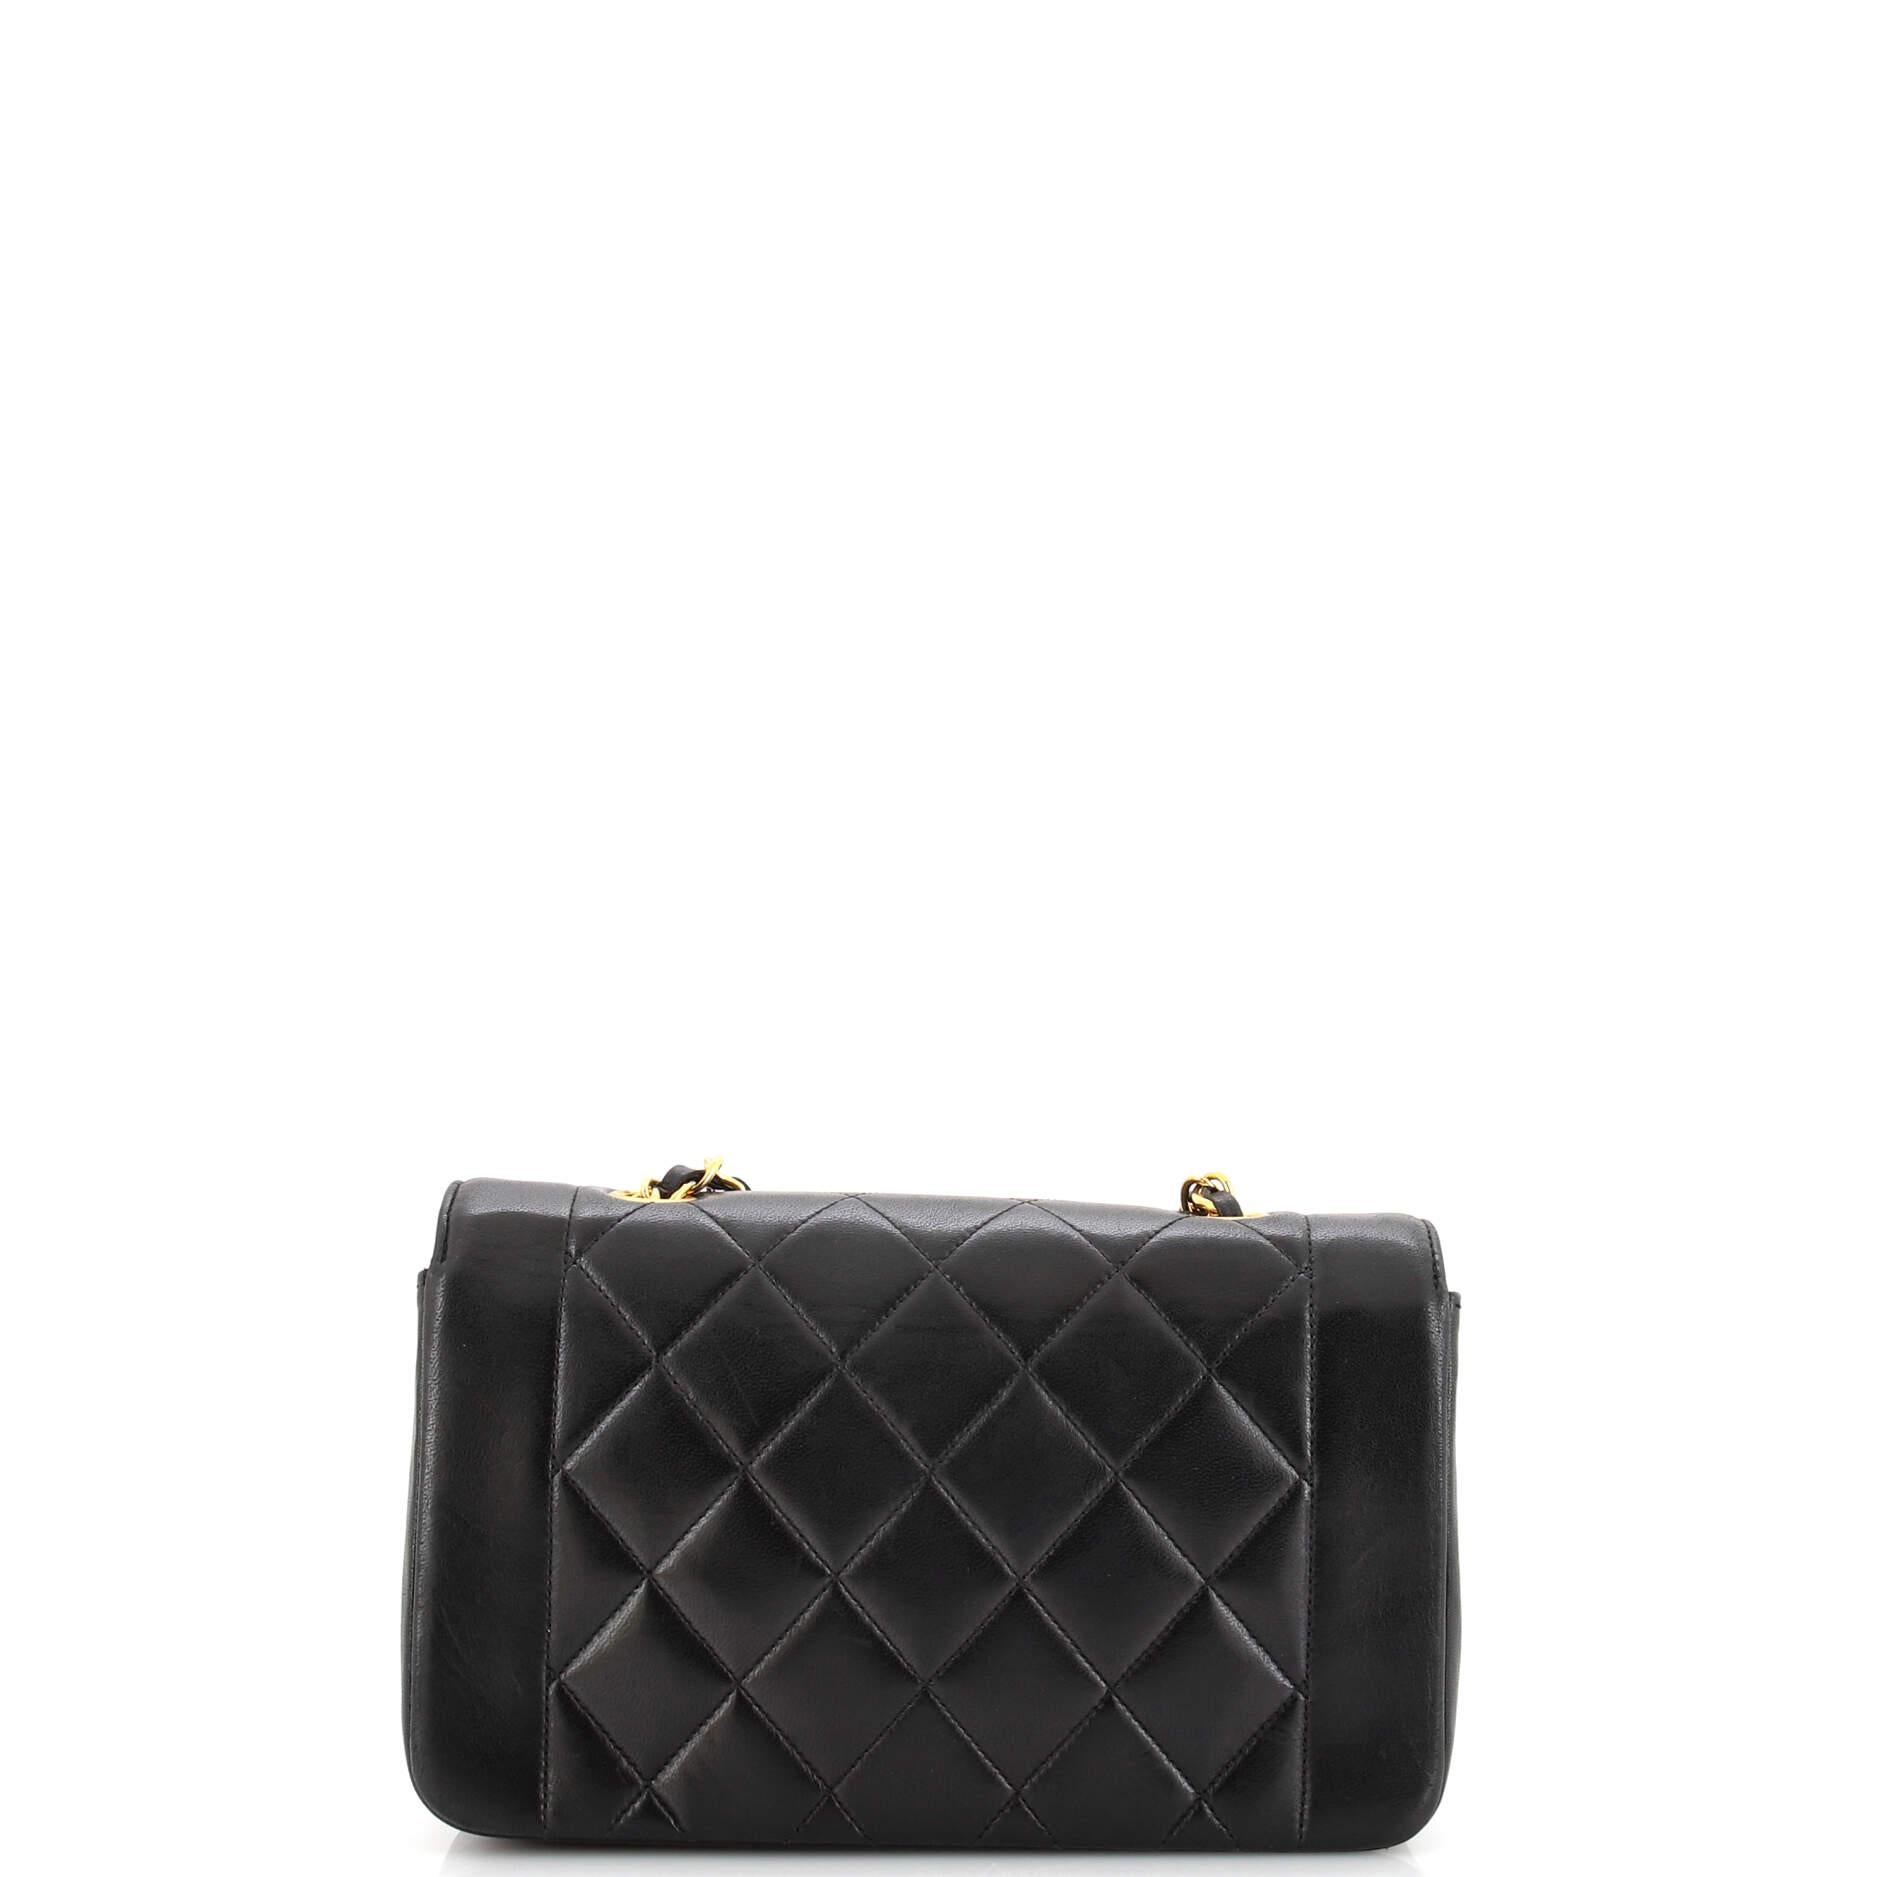 Women's Chanel Vintage Diana Flap Bag Quilted Lambskin Small